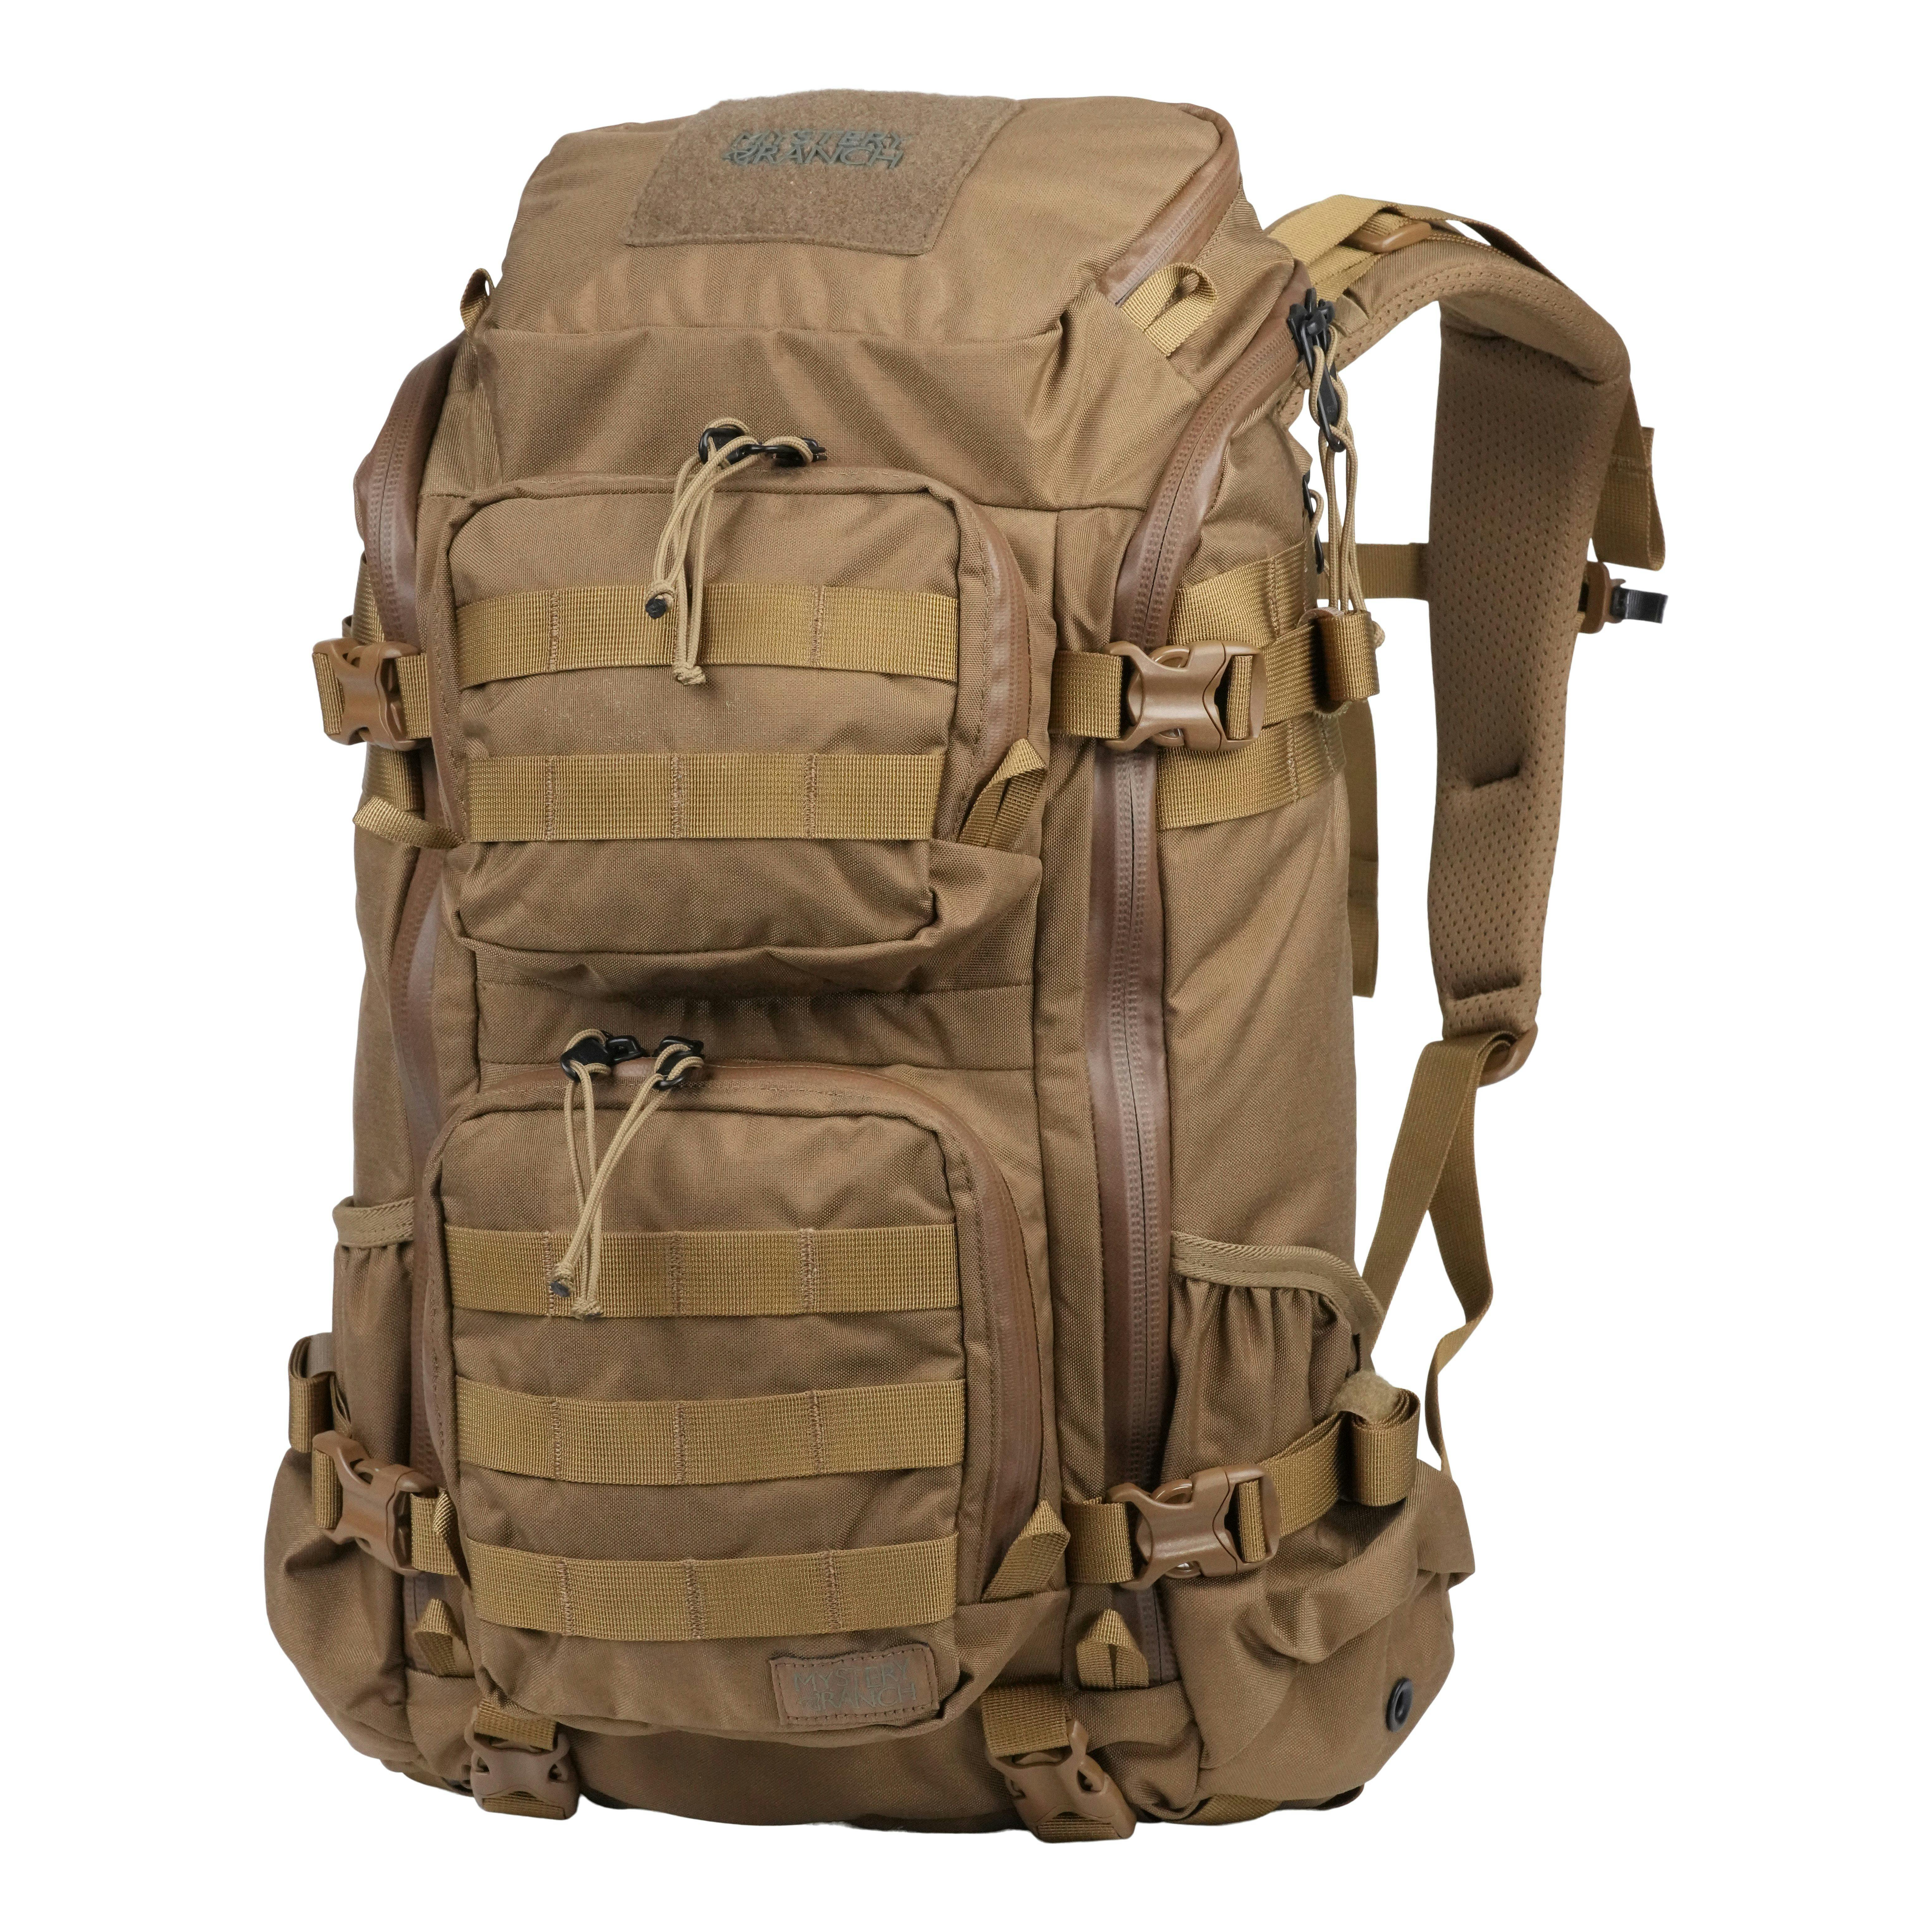 Nathaniel Ward Facet Give rights Mystery Ranch Blitz 30L Backpack - Coyote | Backpacks | Huckberry